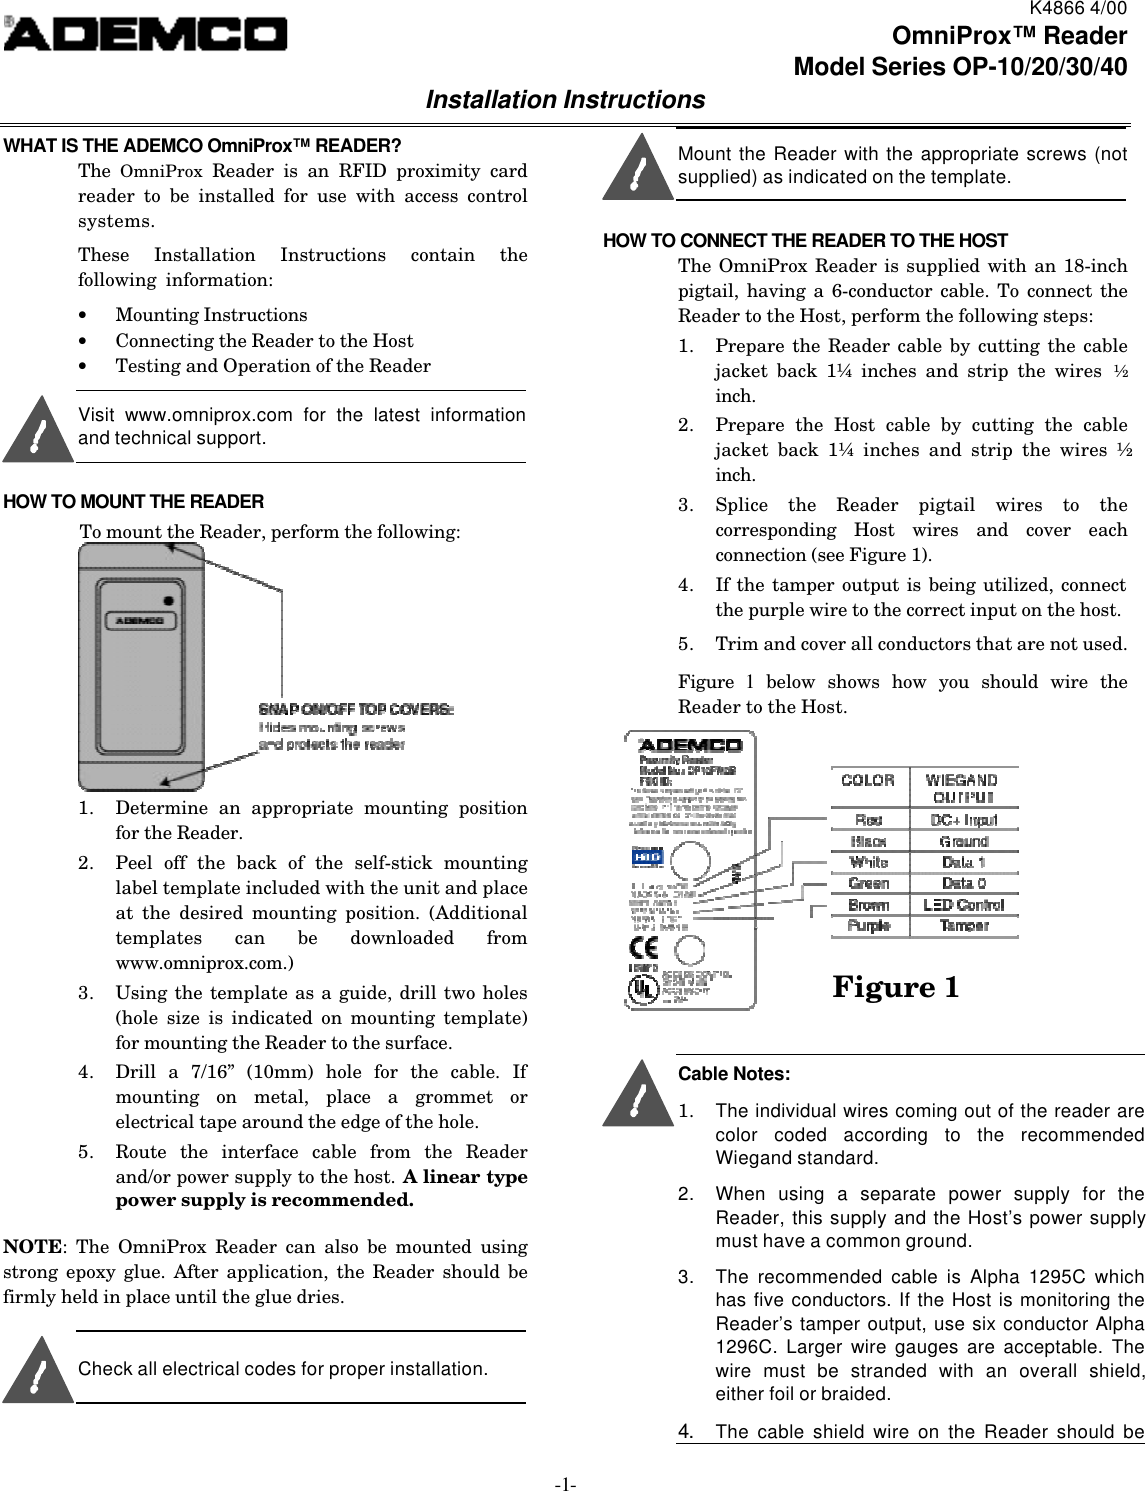 K4866 4/00-1-OmniProx™ ReaderModel Series OP-10/20/30/40Installation InstructionsWHAT IS THE ADEMCO OmniProx™ READER?The  OmniProx  Reader is an RFID proximity cardreader to be installed for use with access controlsystems.These Installation Instructions contain thefollowing  information:• Mounting Instructions• Connecting the Reader to the Host• Testing and Operation of the ReaderVisit www.omniprox.com for the latest informationand technical support.HOW TO MOUNT THE READERTo mount the Reader, perform the following:1. Determine an appropriate mounting positionfor the Reader.2. Peel off the back of the self-stick mountinglabel template included with the unit and placeat the desired mounting position. (Additionaltemplates can be downloaded fromwww.omniprox.com.)3. Using the template as a guide, drill two holes(hole size is indicated on mounting template)for mounting the Reader to the surface.4. Drill a 7/16” (10mm) hole for the cable. Ifmounting on metal, place a grommet orelectrical tape around the edge of the hole.5. Route the interface cable from the Readerand/or power supply to the host. A linear typepower supply is recommended.NOTE: The OmniProx Reader can also be mounted usingstrong epoxy glue. After application, the Reader should befirmly held in place until the glue dries.Check all electrical codes for proper installation.Mount the Reader with the appropriate screws (notsupplied) as indicated on the template.HOW TO CONNECT THE READER TO THE HOSTThe OmniProx Reader is supplied with an 18-inchpigtail, having a 6-conductor cable. To connect theReader to the Host, perform the following steps:1. Prepare the Reader cable by cutting the cablejacket back 1¼ inches and strip the wires  ½inch.2. Prepare the Host cable by cutting the cablejacket back 1¼ inches and strip the wires ½inch.3. Splice the Reader pigtail wires to thecorresponding Host wires and cover eachconnection (see Figure 1).4. If the tamper output is being utilized, connectthe purple wire to the correct input on the host.5. Trim and cover all conductors that are not used.Figure  1 below shows how you should wire theReader to the Host.Cable Notes:1. The individual wires coming out of the reader arecolor coded according to the recommendedWiegand standard.2. When using a separate power supply for theReader, this supply and the Host’s power supplymust have a common ground.3. The recommended cable is Alpha 1295C whichhas five conductors. If the Host is monitoring theReader’s tamper output, use six conductor Alpha1296C. Larger wire gauges are acceptable. Thewire must be stranded with an overall shield,either foil or braided.4. The cable shield wire on the Reader should beFigure 1